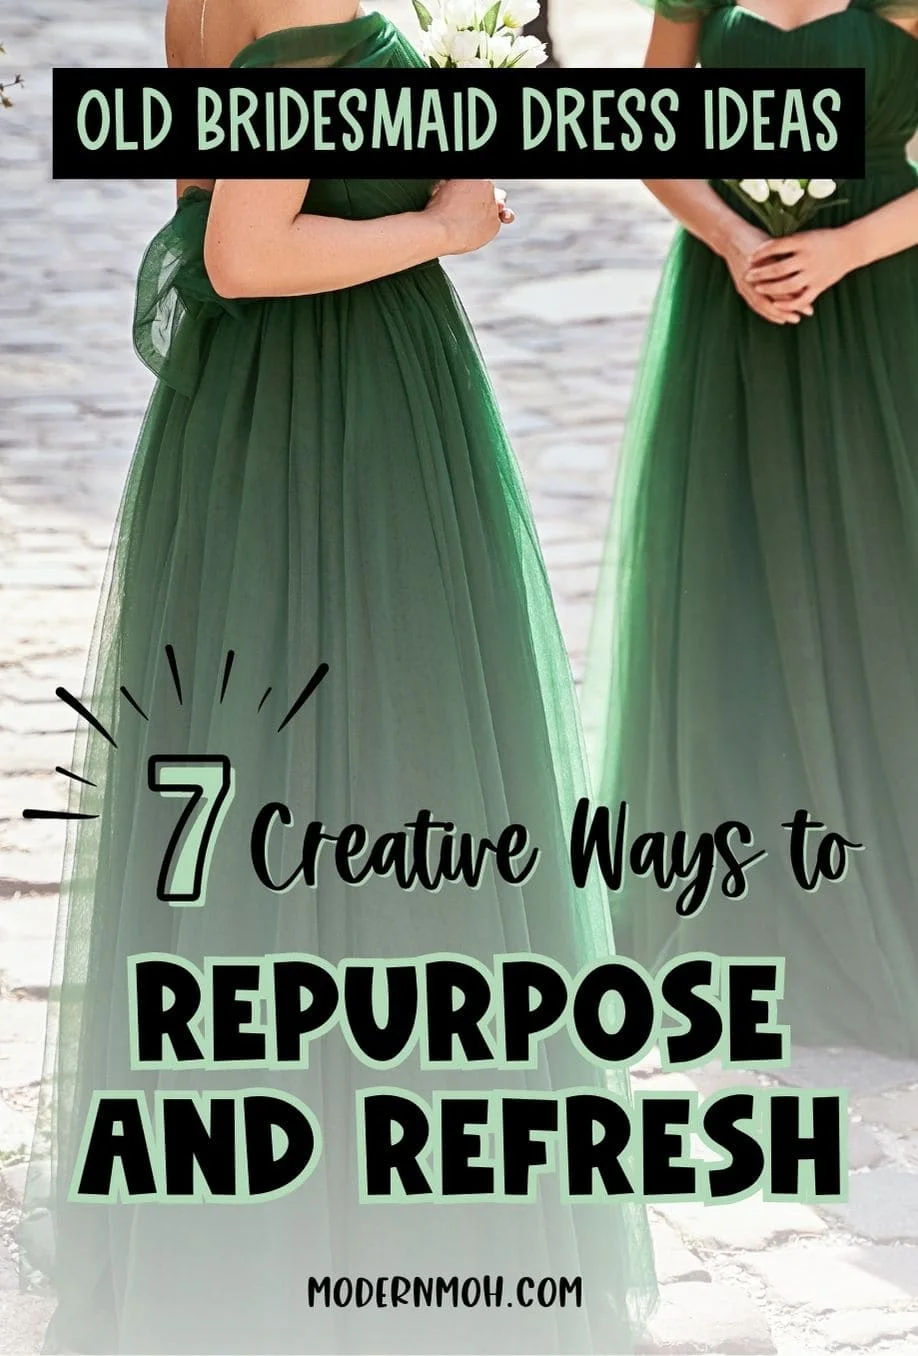 What to Do with Old Bridesmaid Dresses: 7 Great Ideas